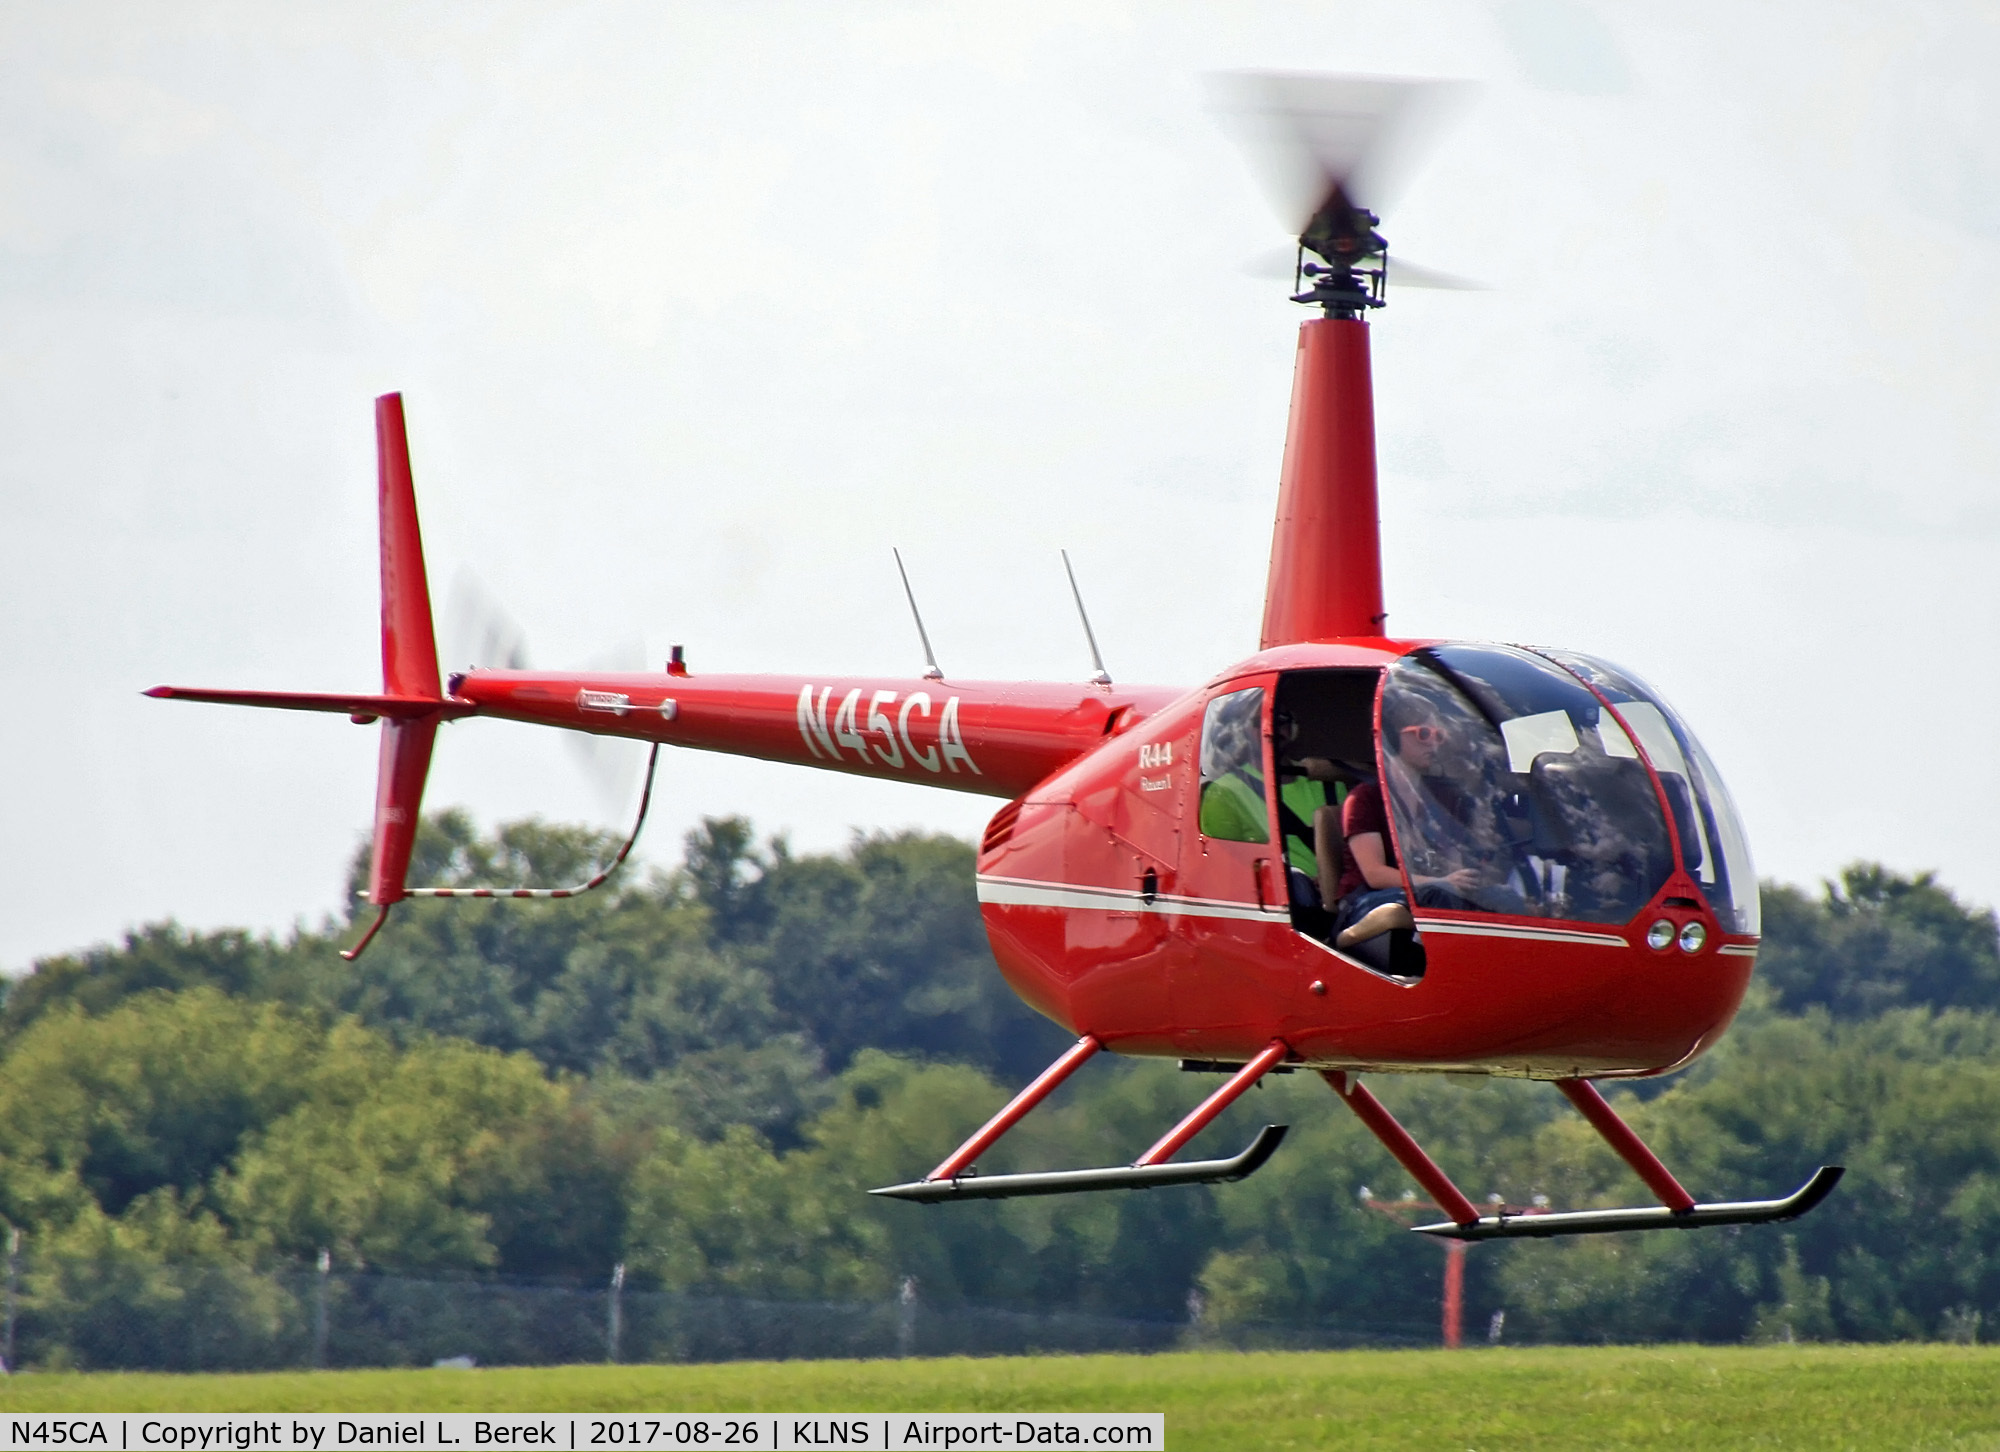 N45CA, 2012 Robinson R44 C/N 2242, This cheerful red helicopter was offering rides during the 2017 airshow in Lancaster, PA.